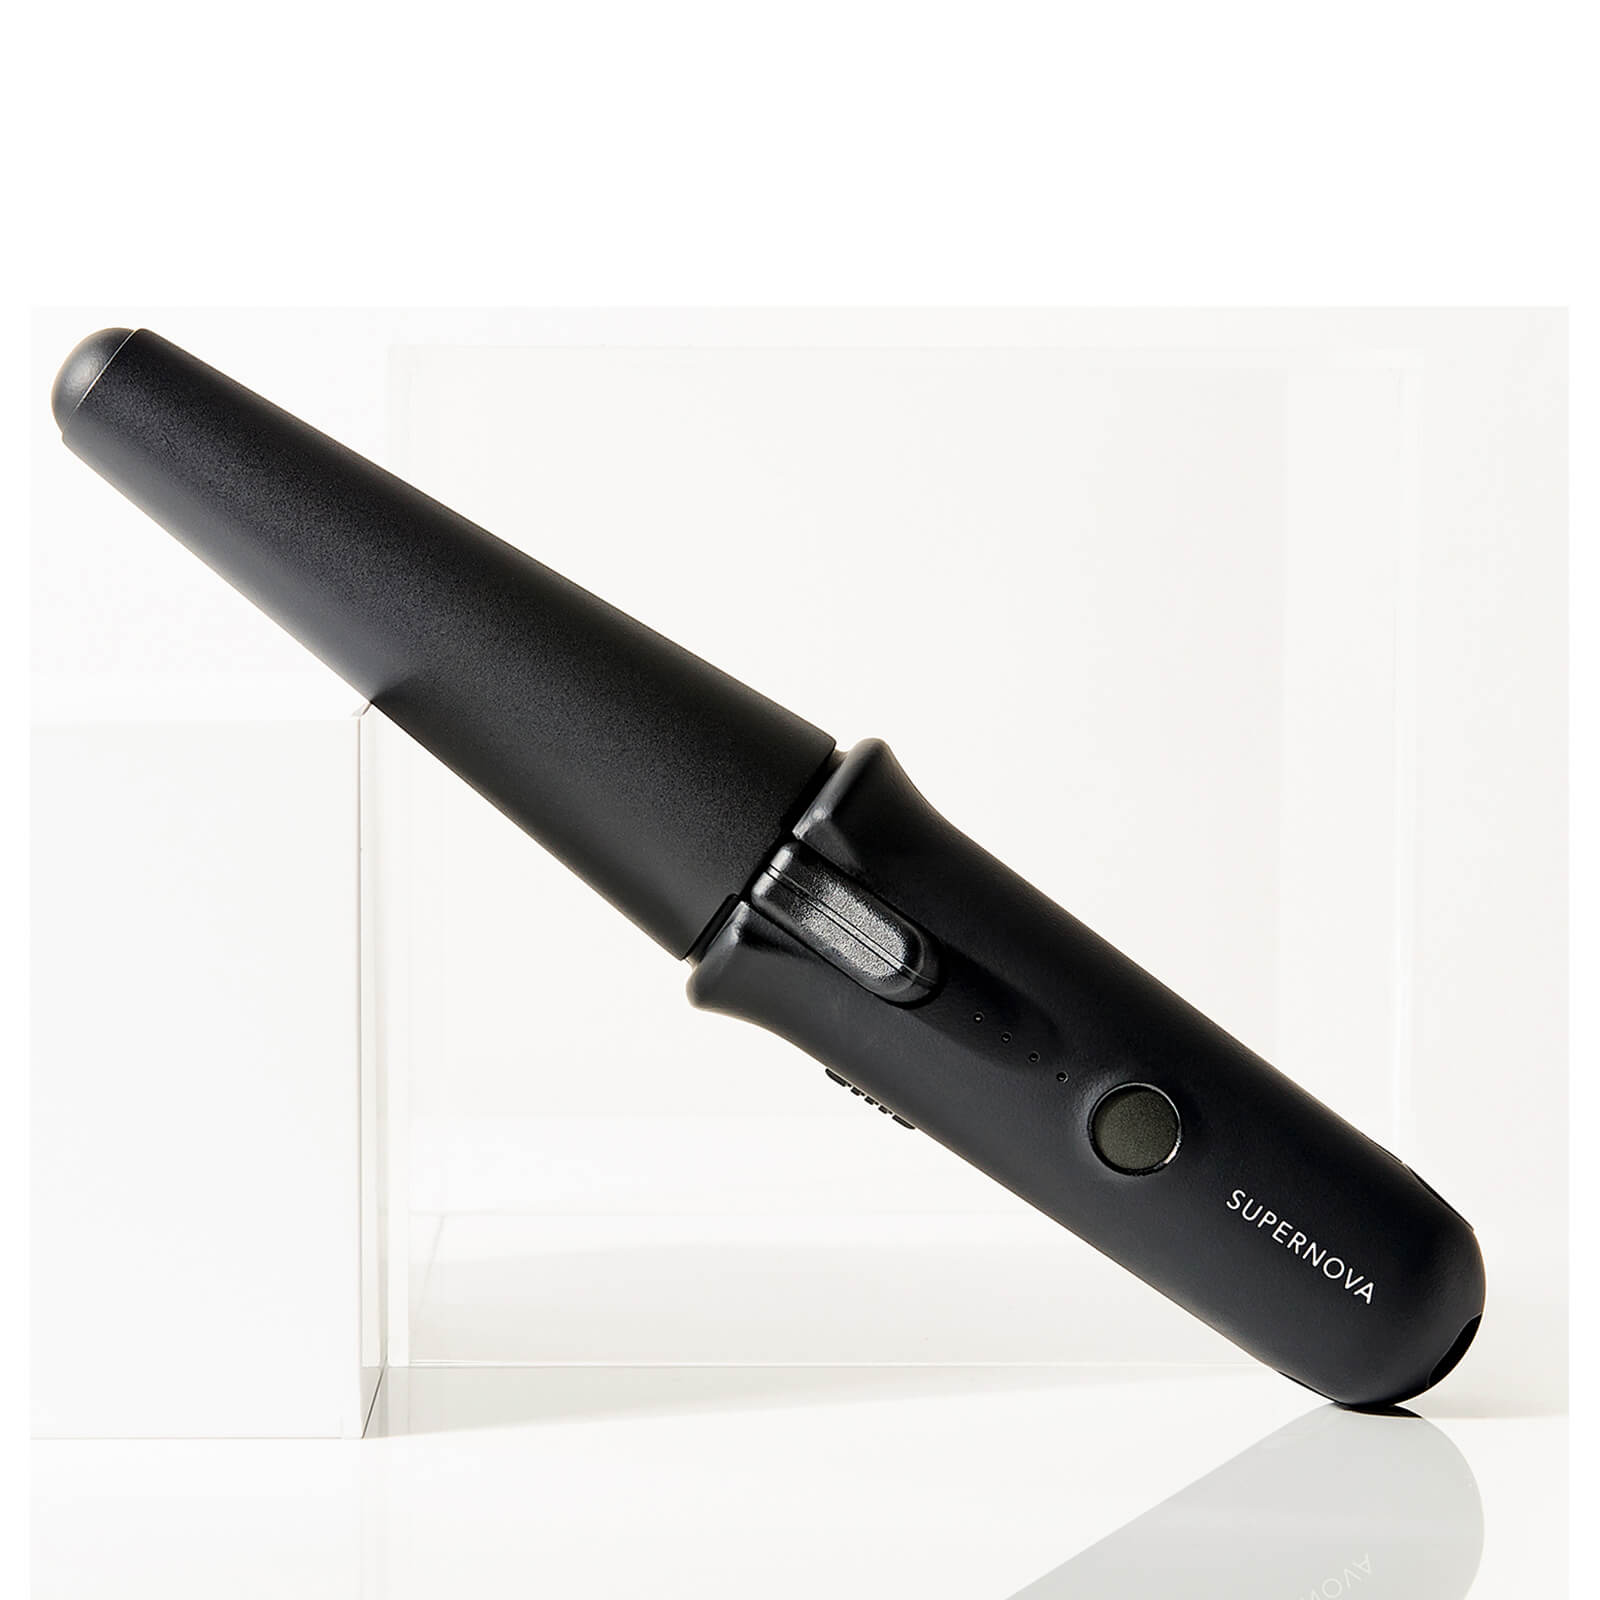 babyliss 7756u review